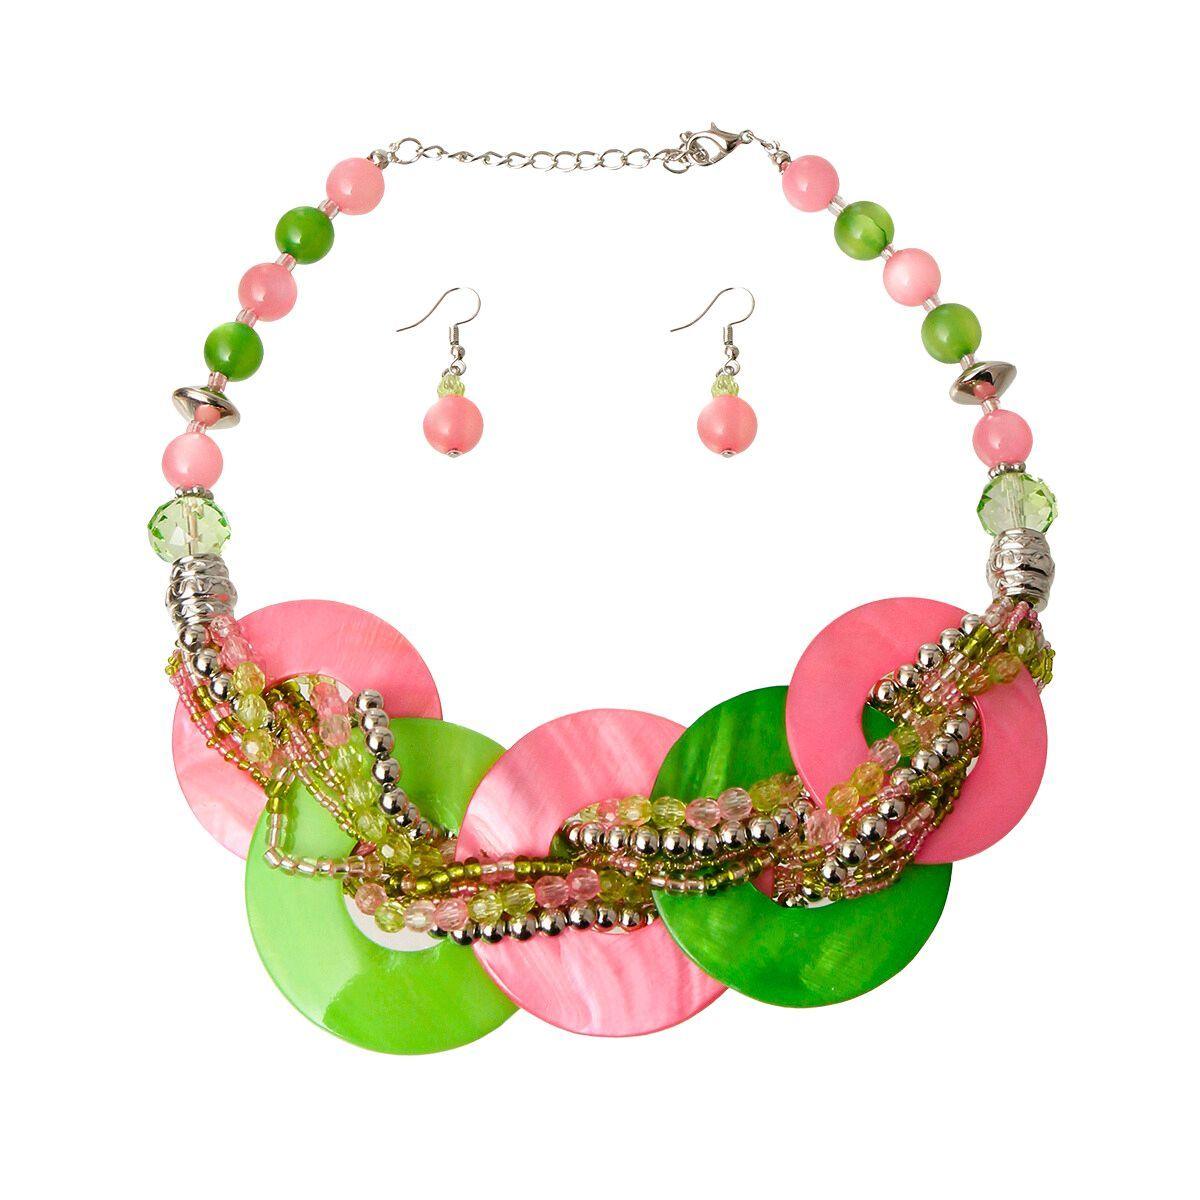 Shop Now: Women's Pink/Green Annulus Bead Necklace Set - New Arrival!